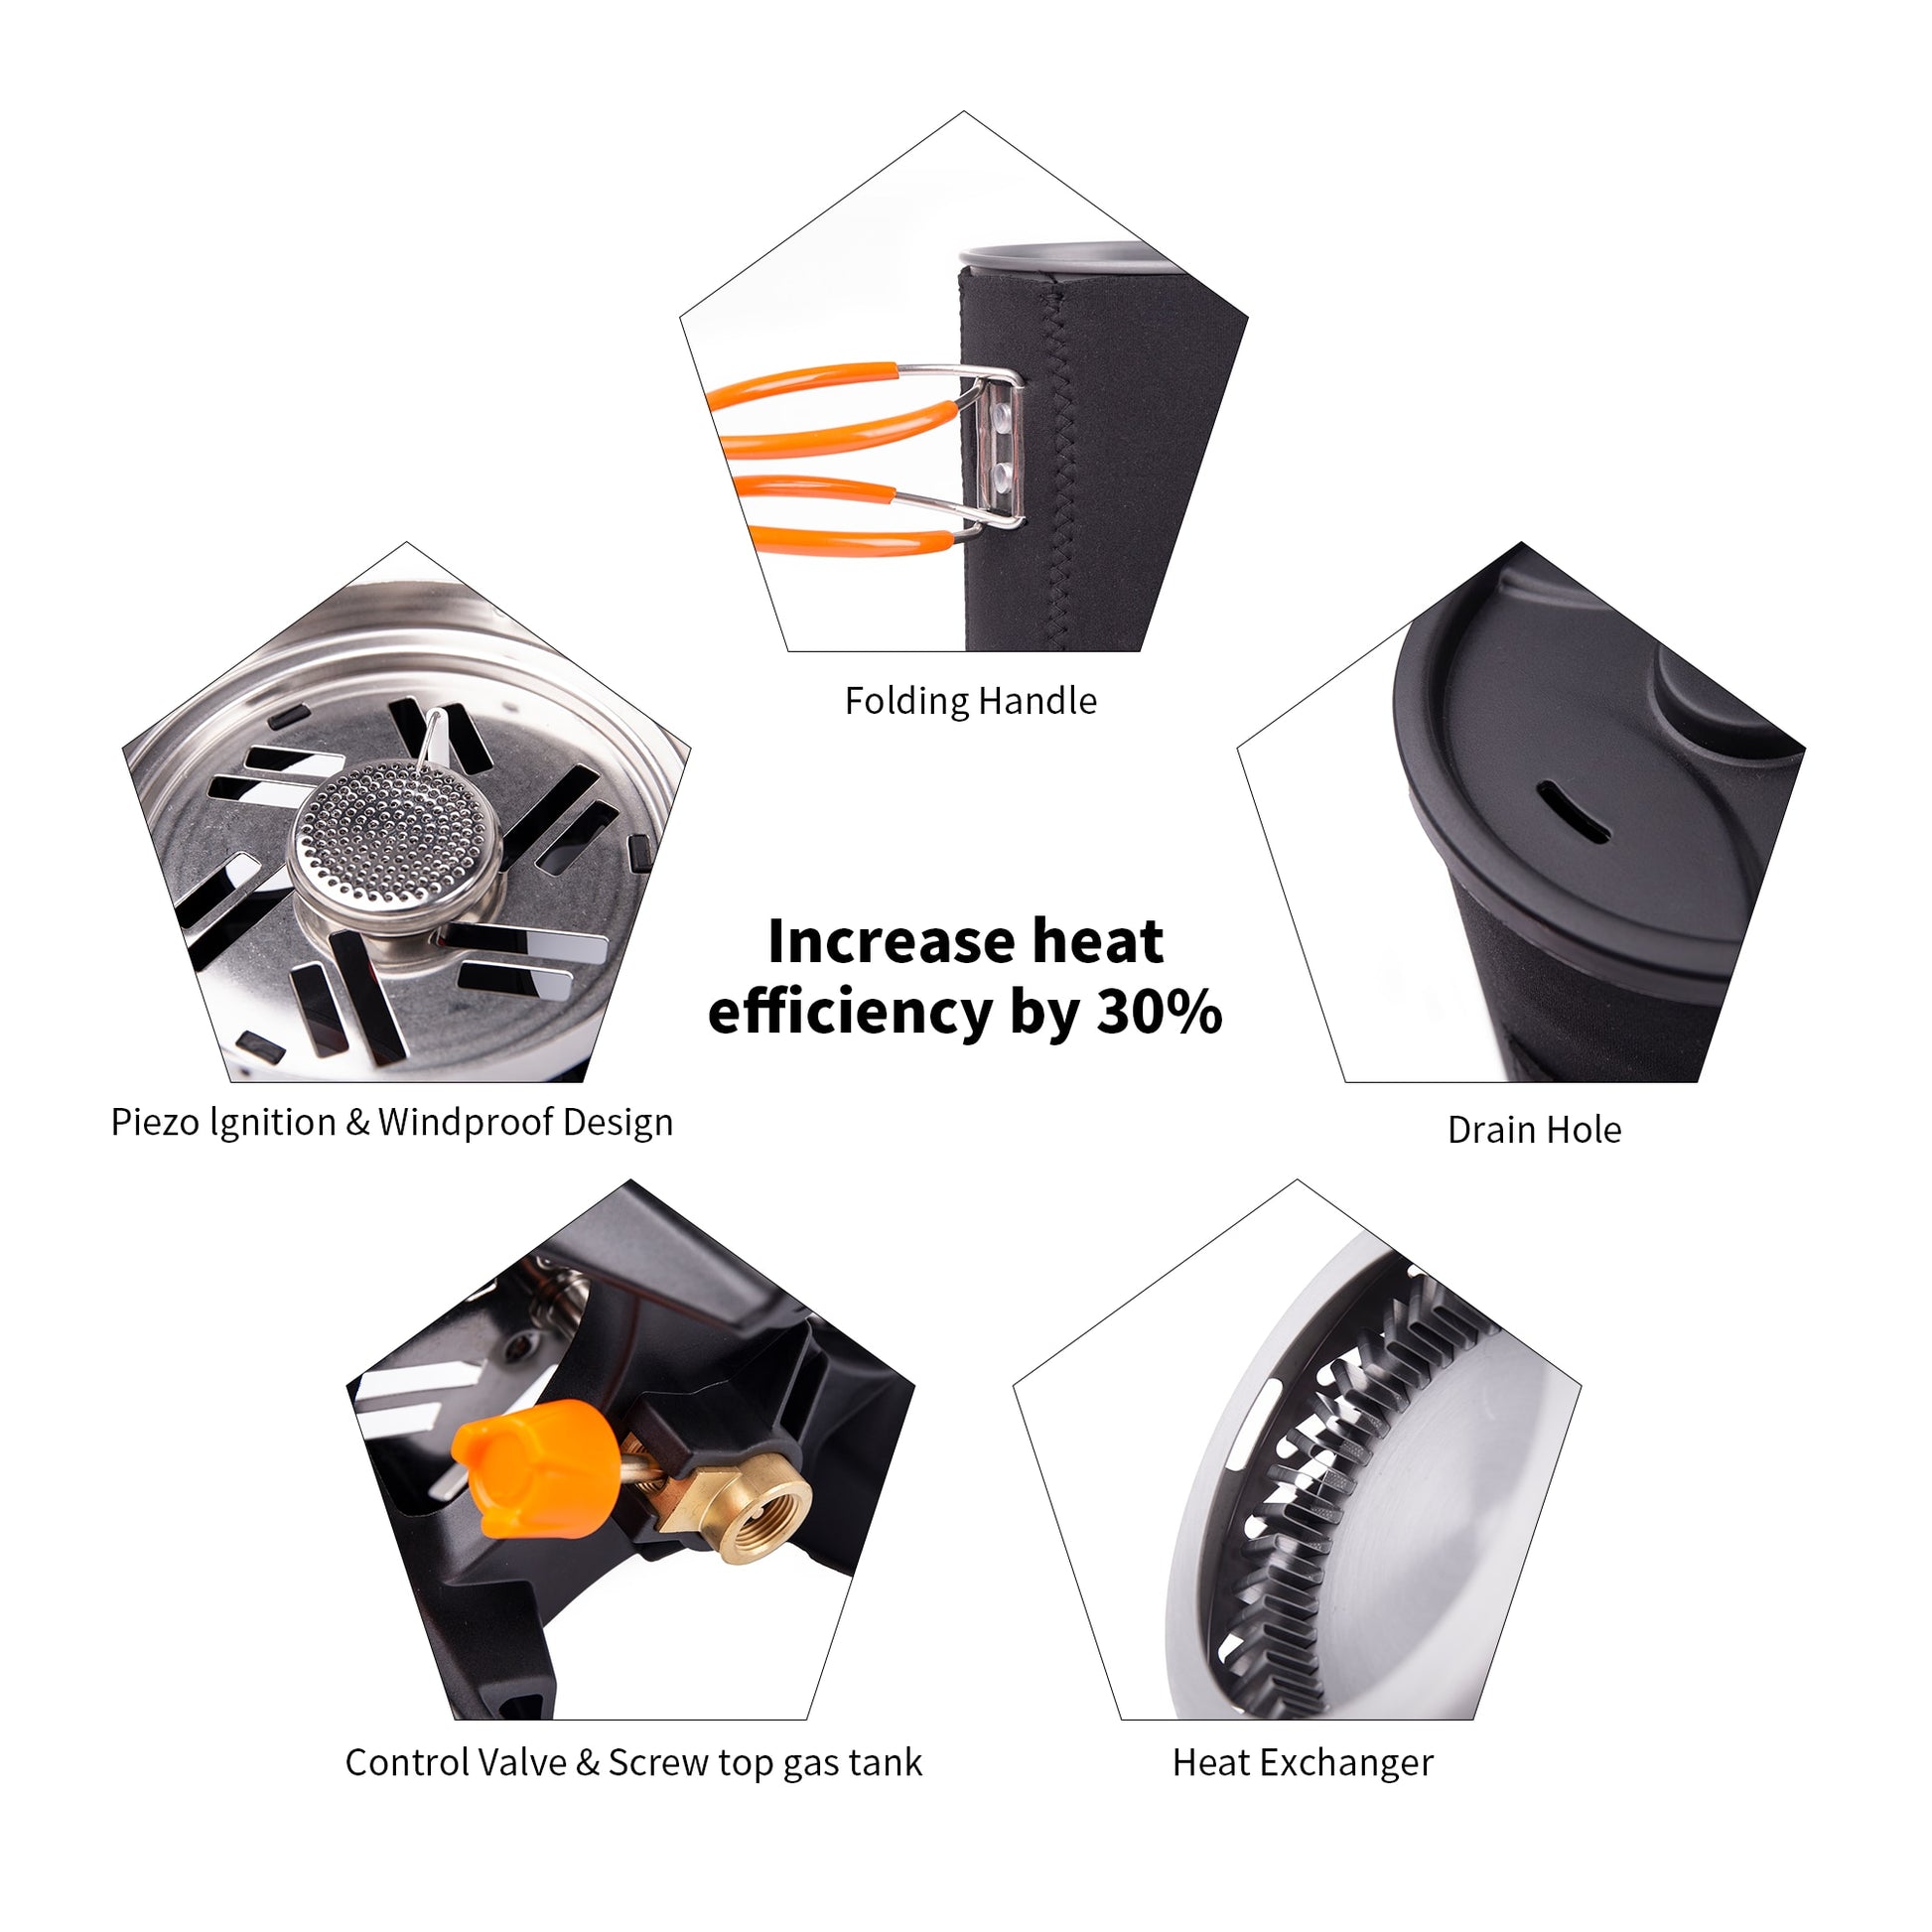 Fire Maple Star X1 Camping Stoves Outdoor Hiking Cooking System With Stove Heat Exchanger Pot Bowl Portable Gas Burners FMS-X1 Camping Stoves DailyAlertDeals   